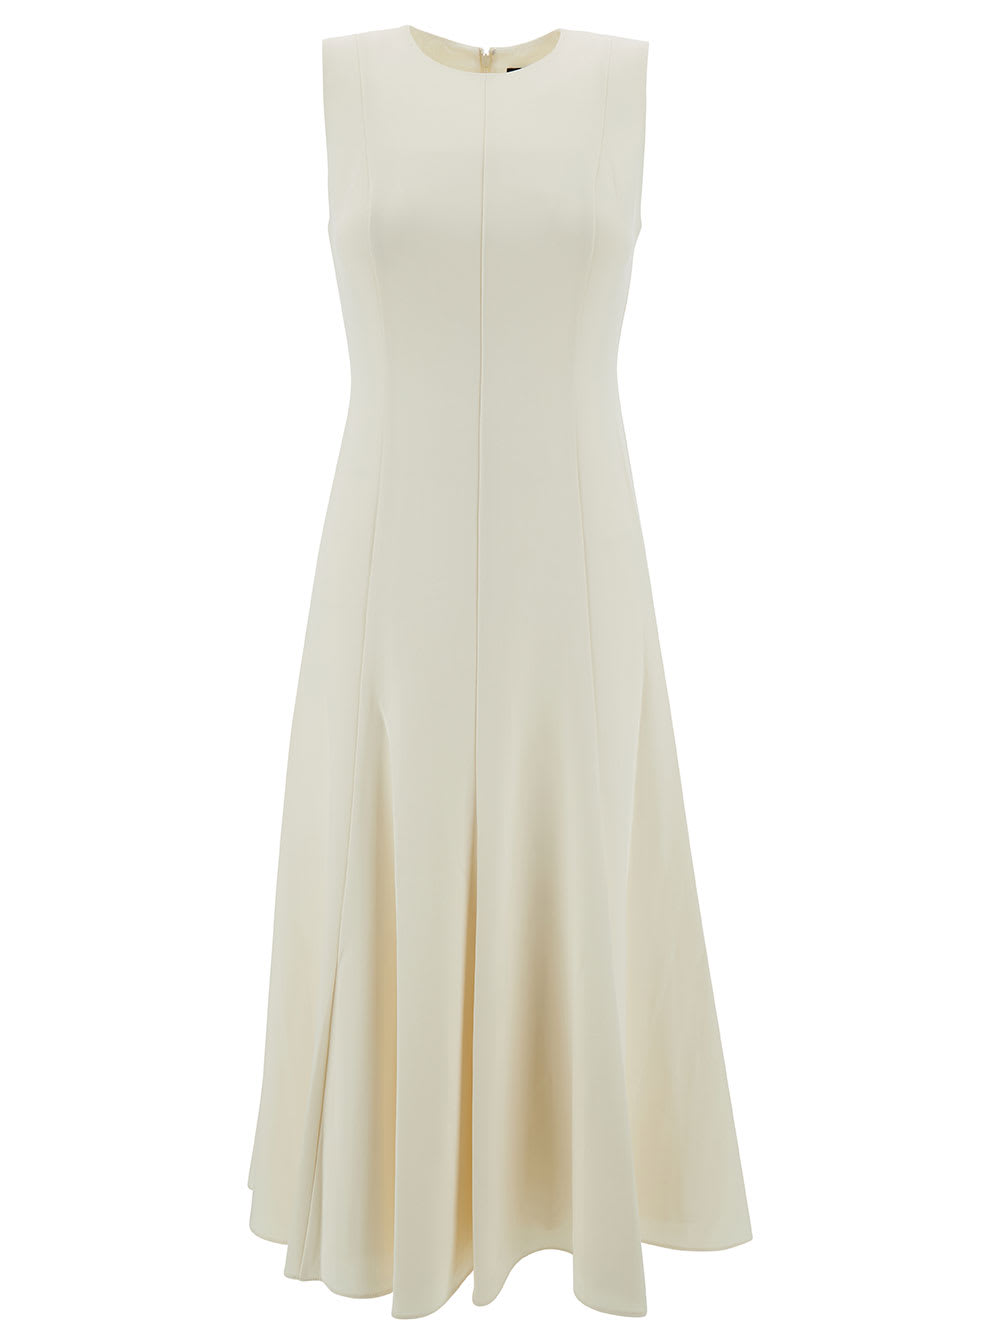 Midi White Sleeveless Dress With Pleated Skirt In Triacetate Blend Woman